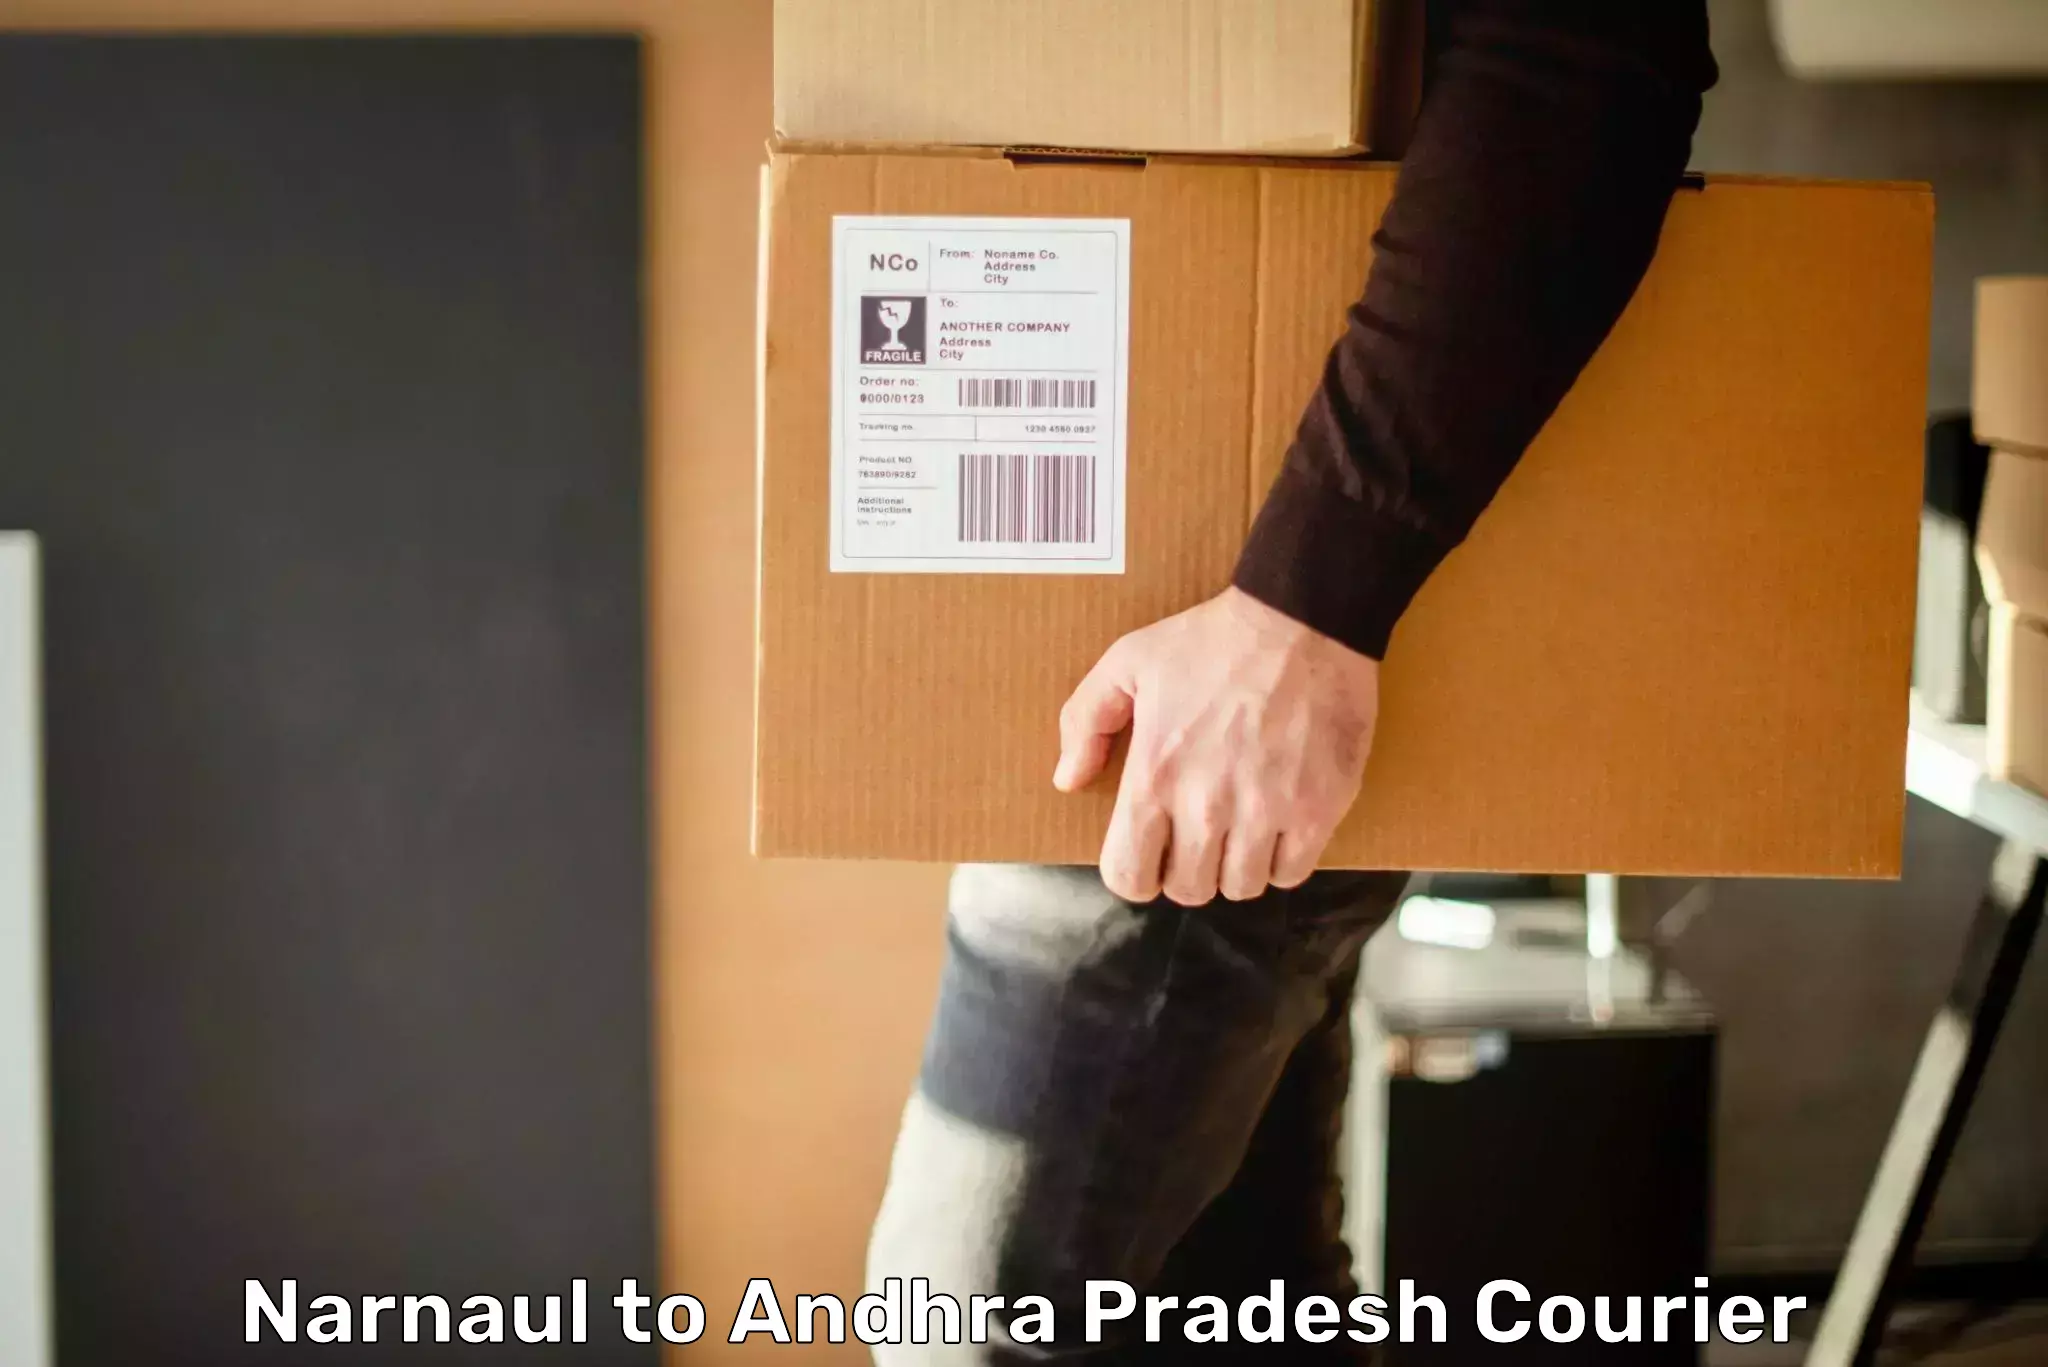 Global courier networks Narnaul to Andhra Pradesh